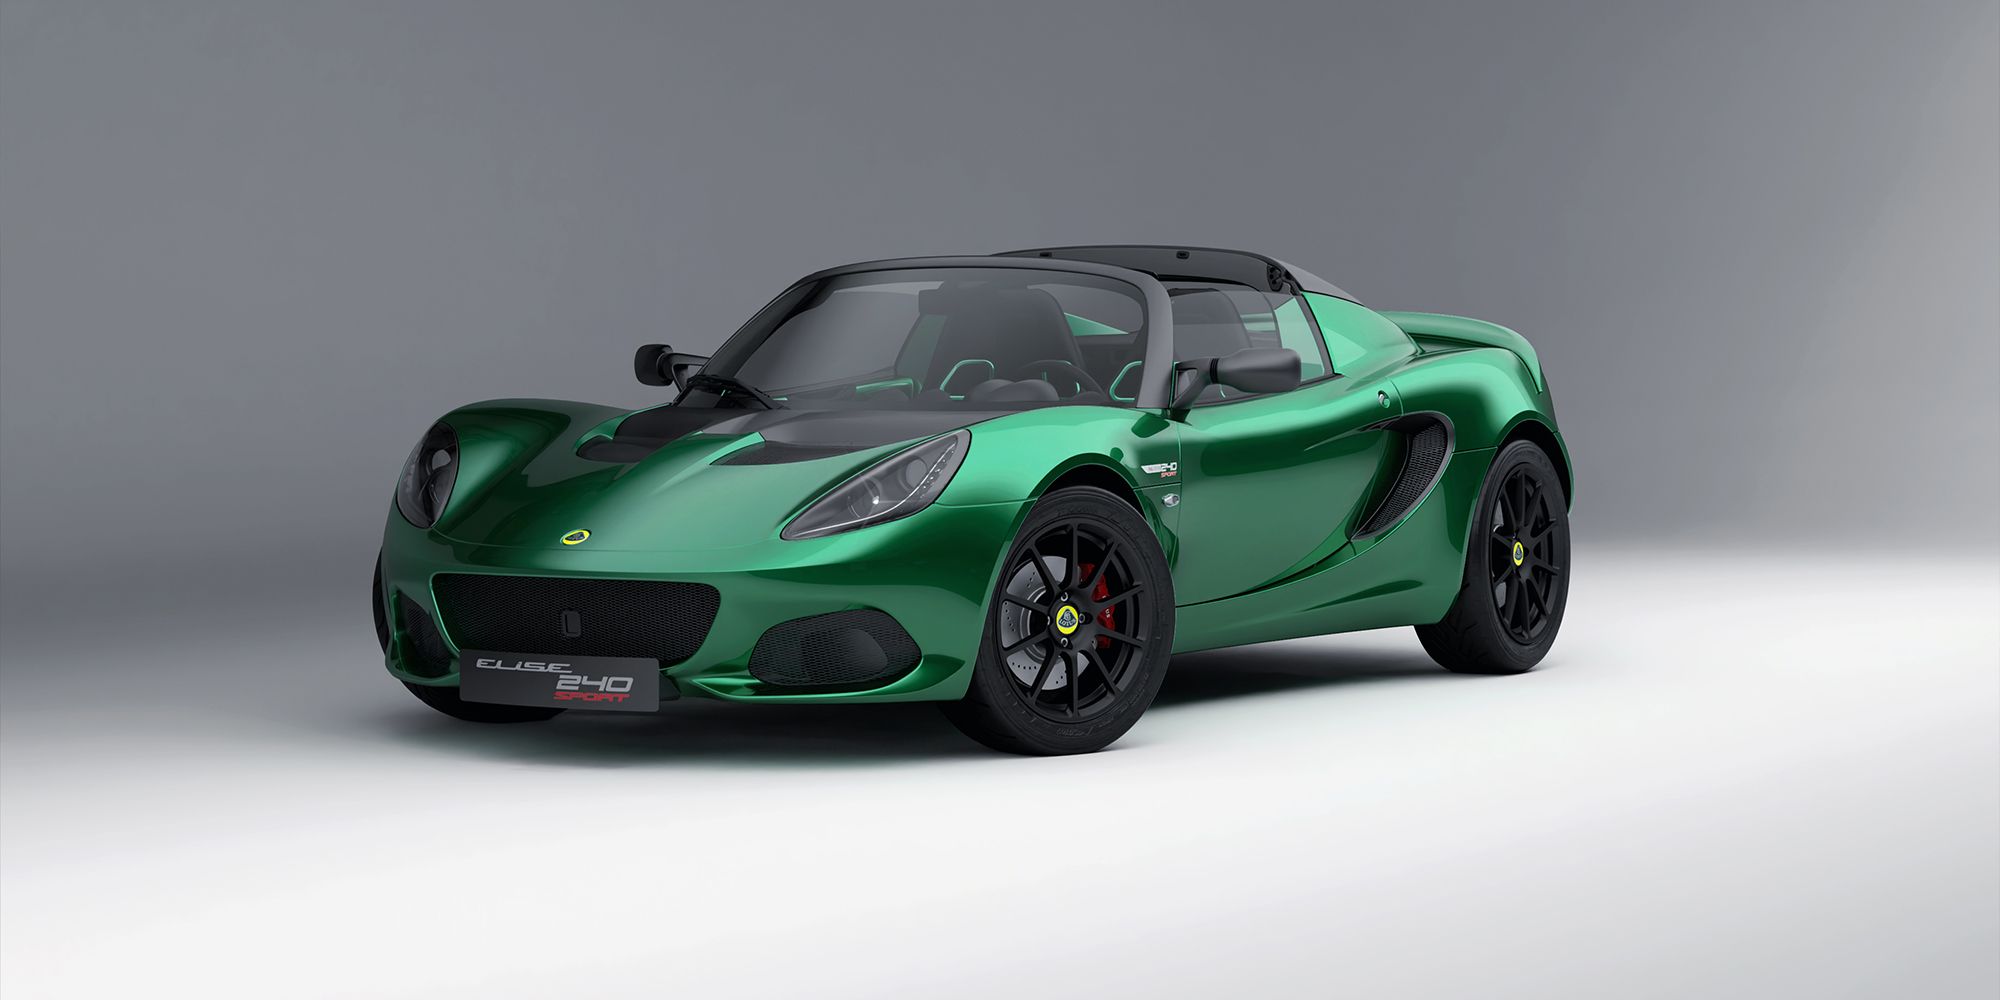 The front of the latest Elise